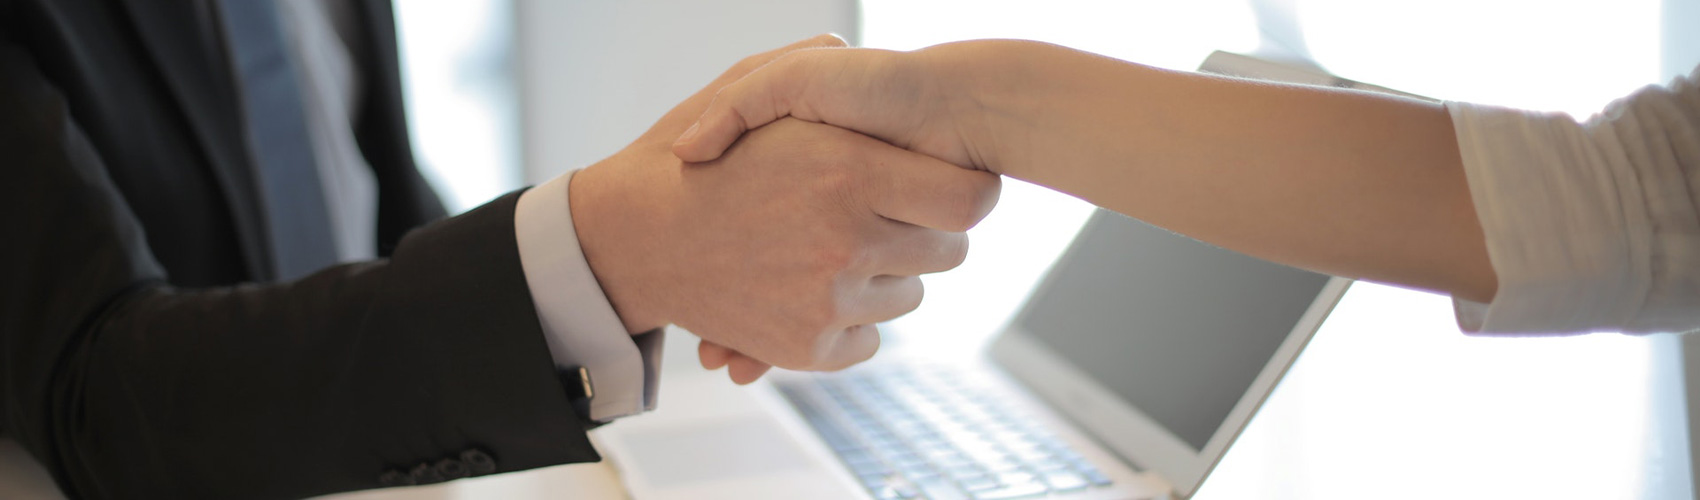 Two people in business attire shaking hands, featuring a laptop on a table in the background